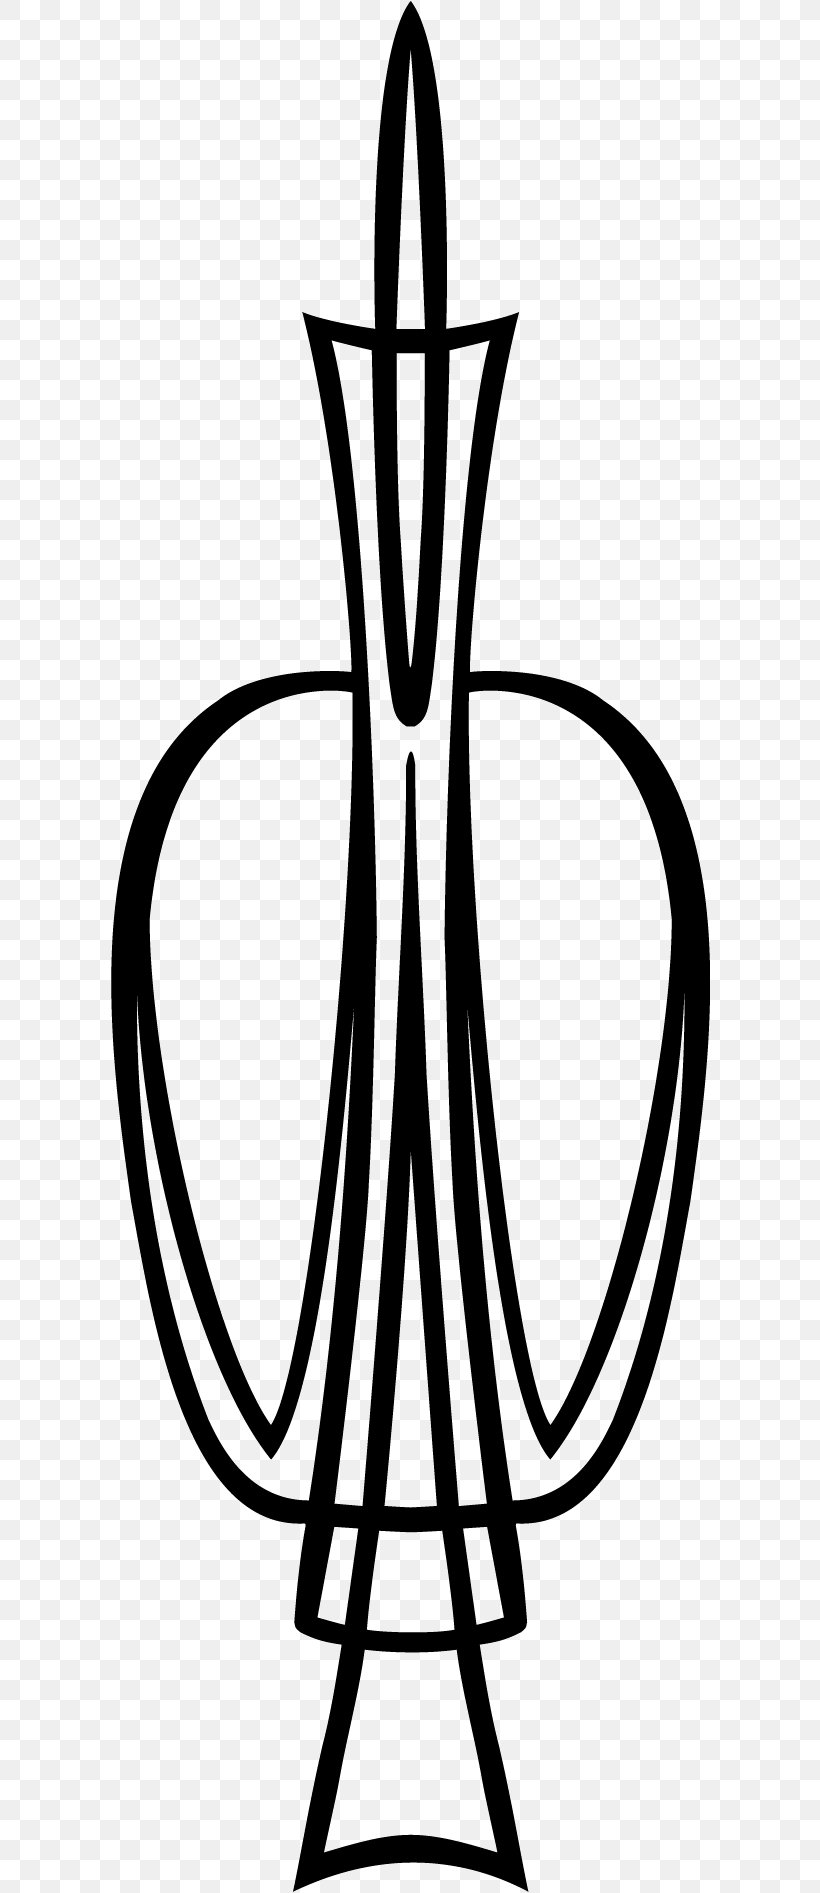 Decal Sticker Clip Art Pinstriping, PNG, 600x1893px, Decal, Art, Artwork, Black, Black And White Download Free